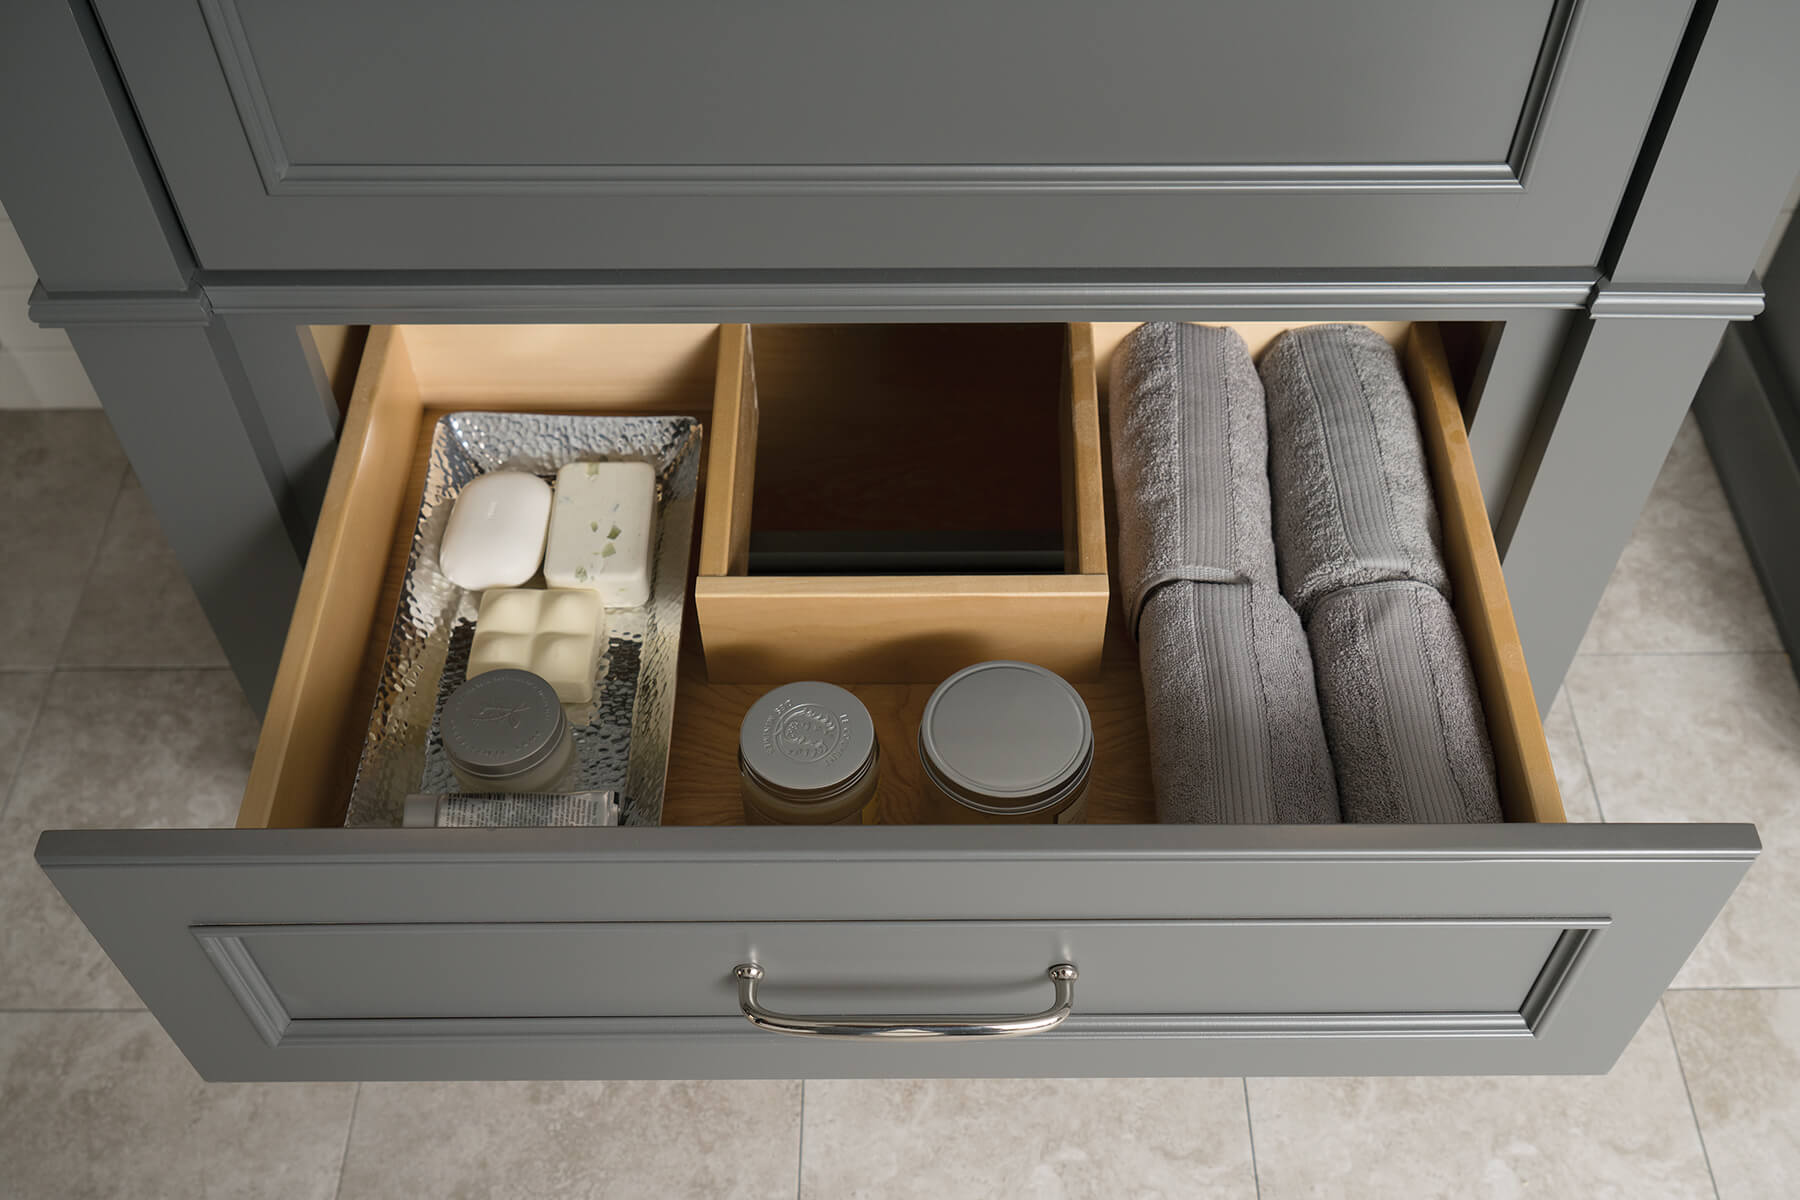 A plumbing drawer for a bathroom sink cabinet.